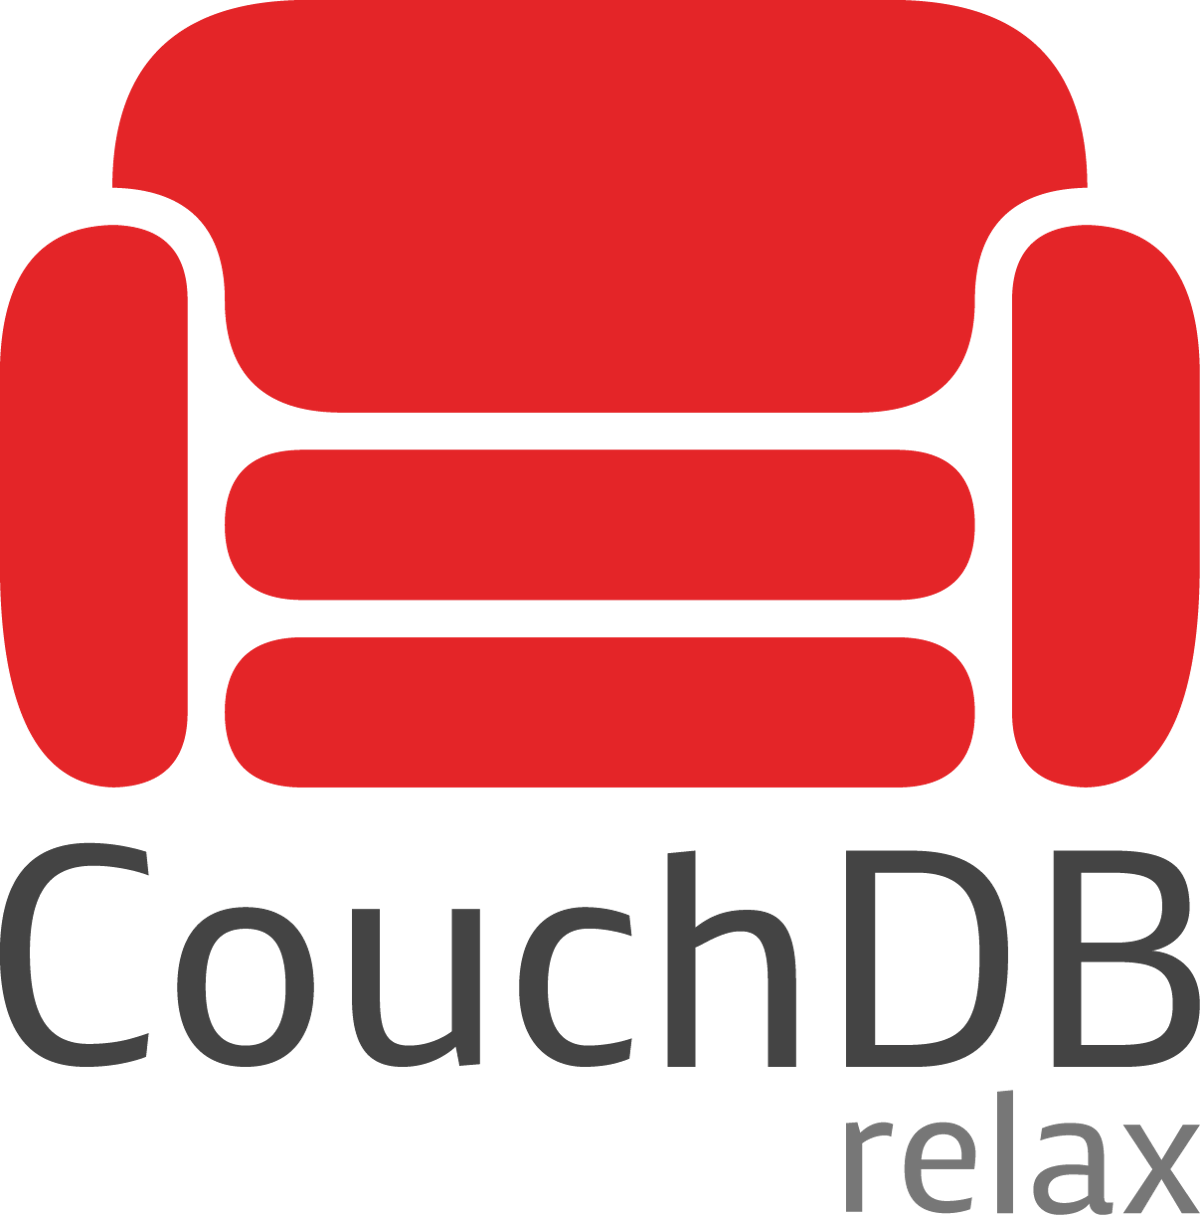 featured image - Running a CouchDB 2 Cluster in Production on AWS with Docker